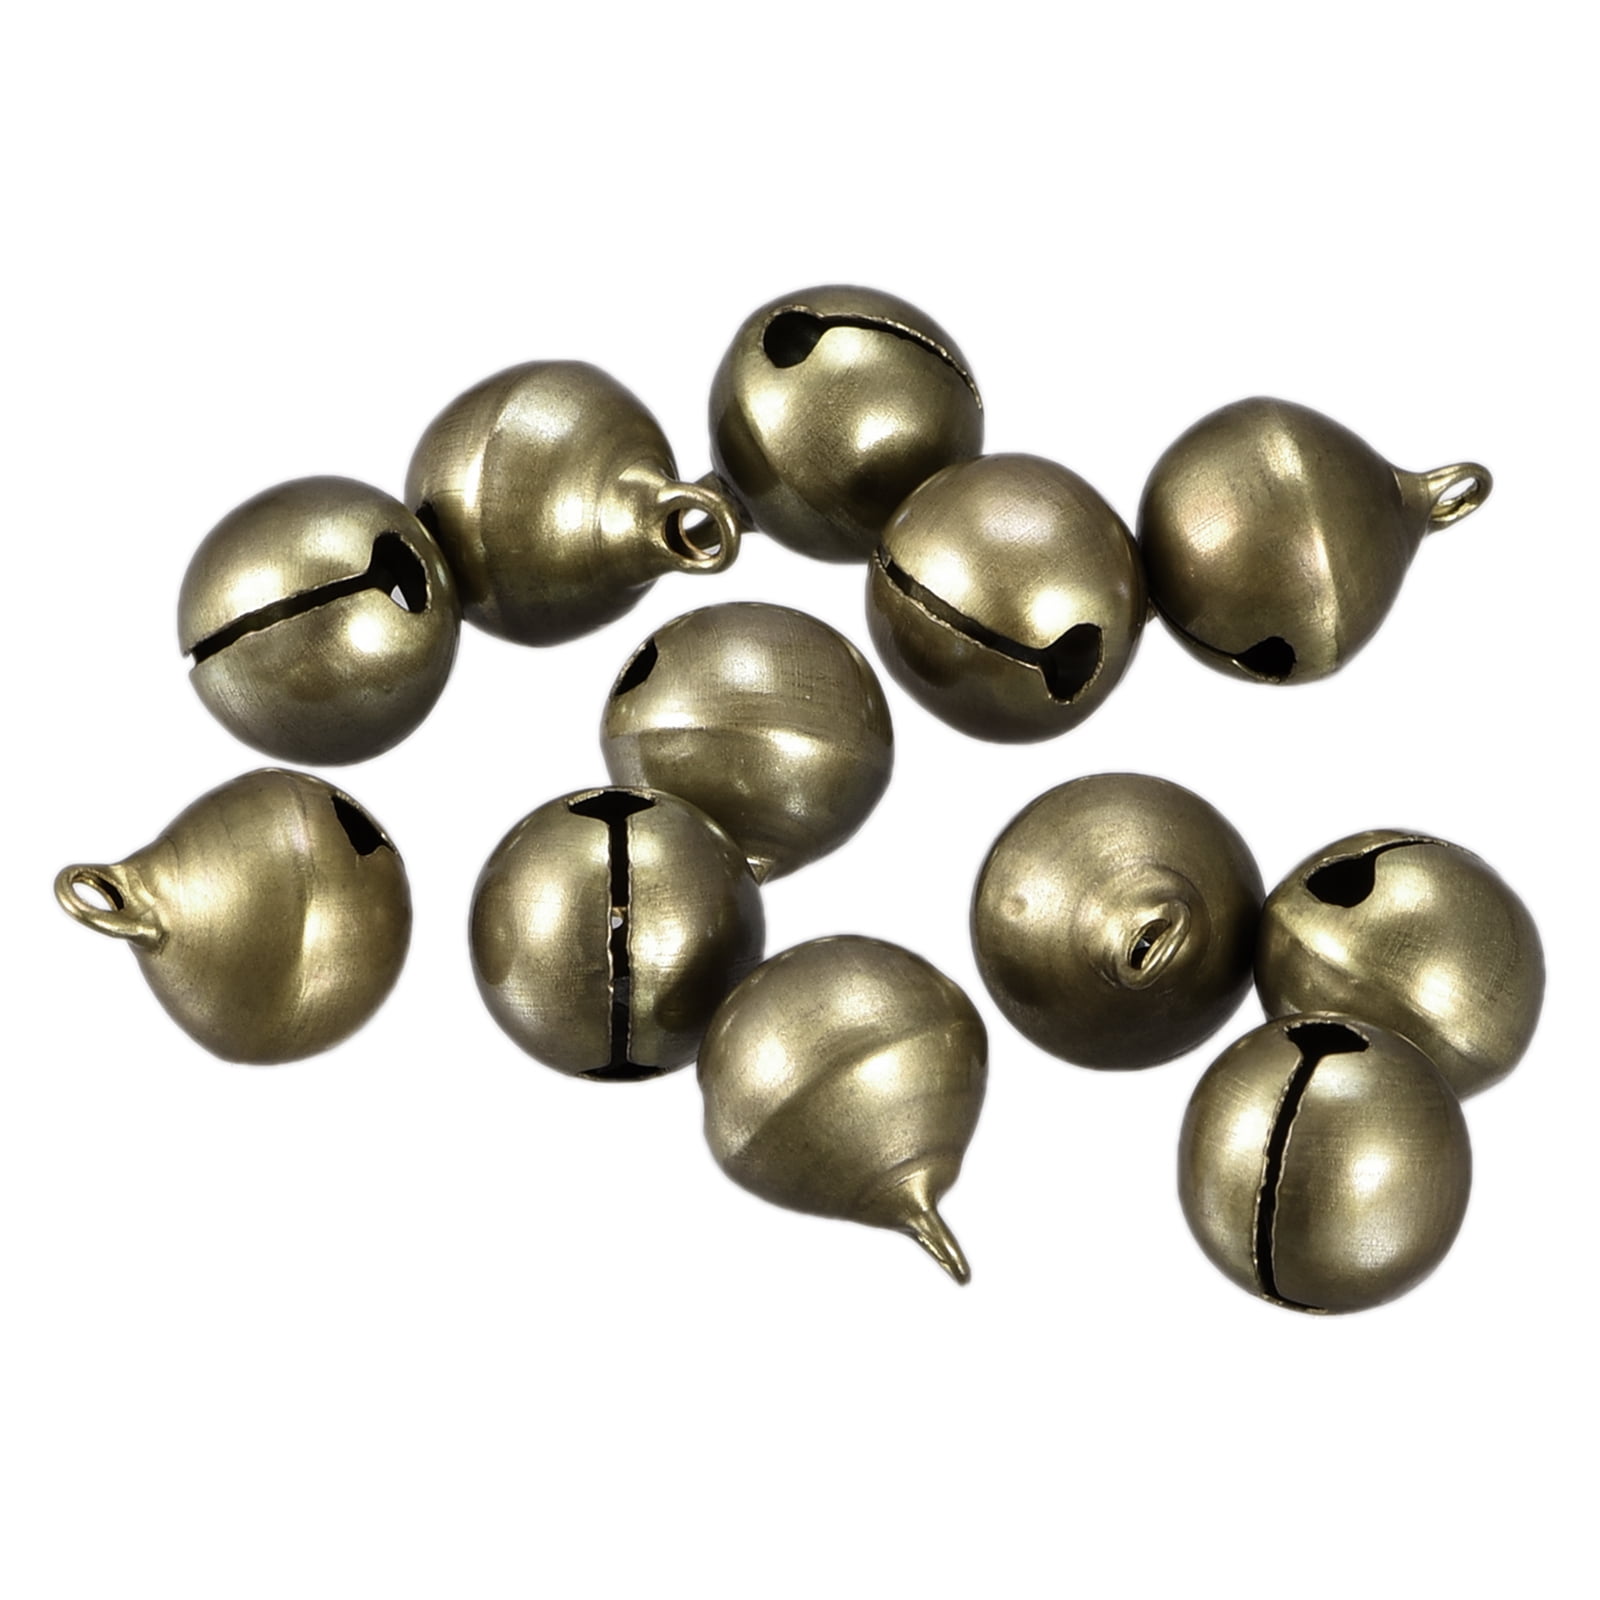 Formosa Crafts - Silver Jingle Bells 12mm 15mm 144 Pieces